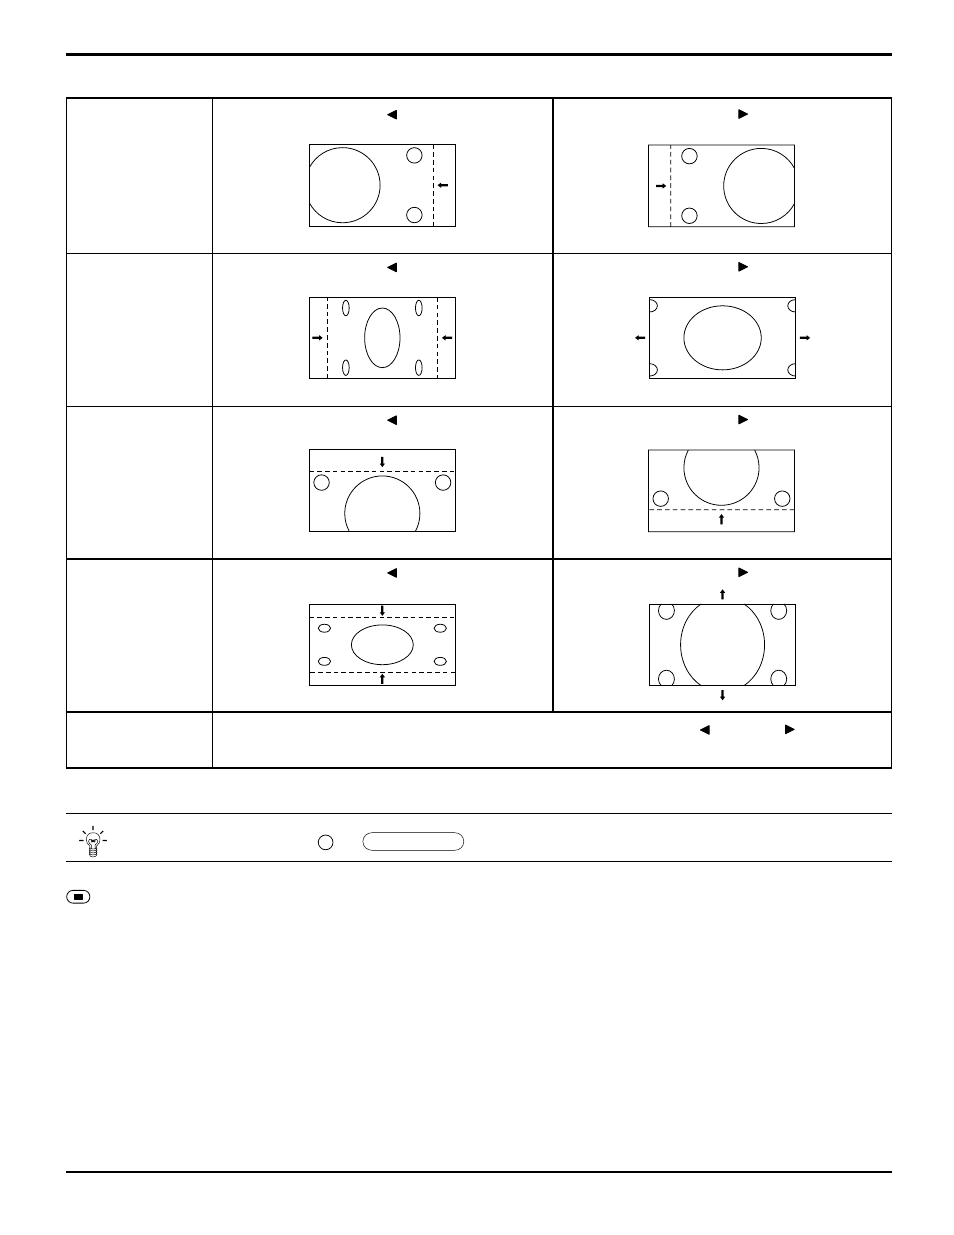 Helpful hint, Normalization), Adjusting picture pos./size | Yamaha PDM-1 User Manual | Page 25 / 40